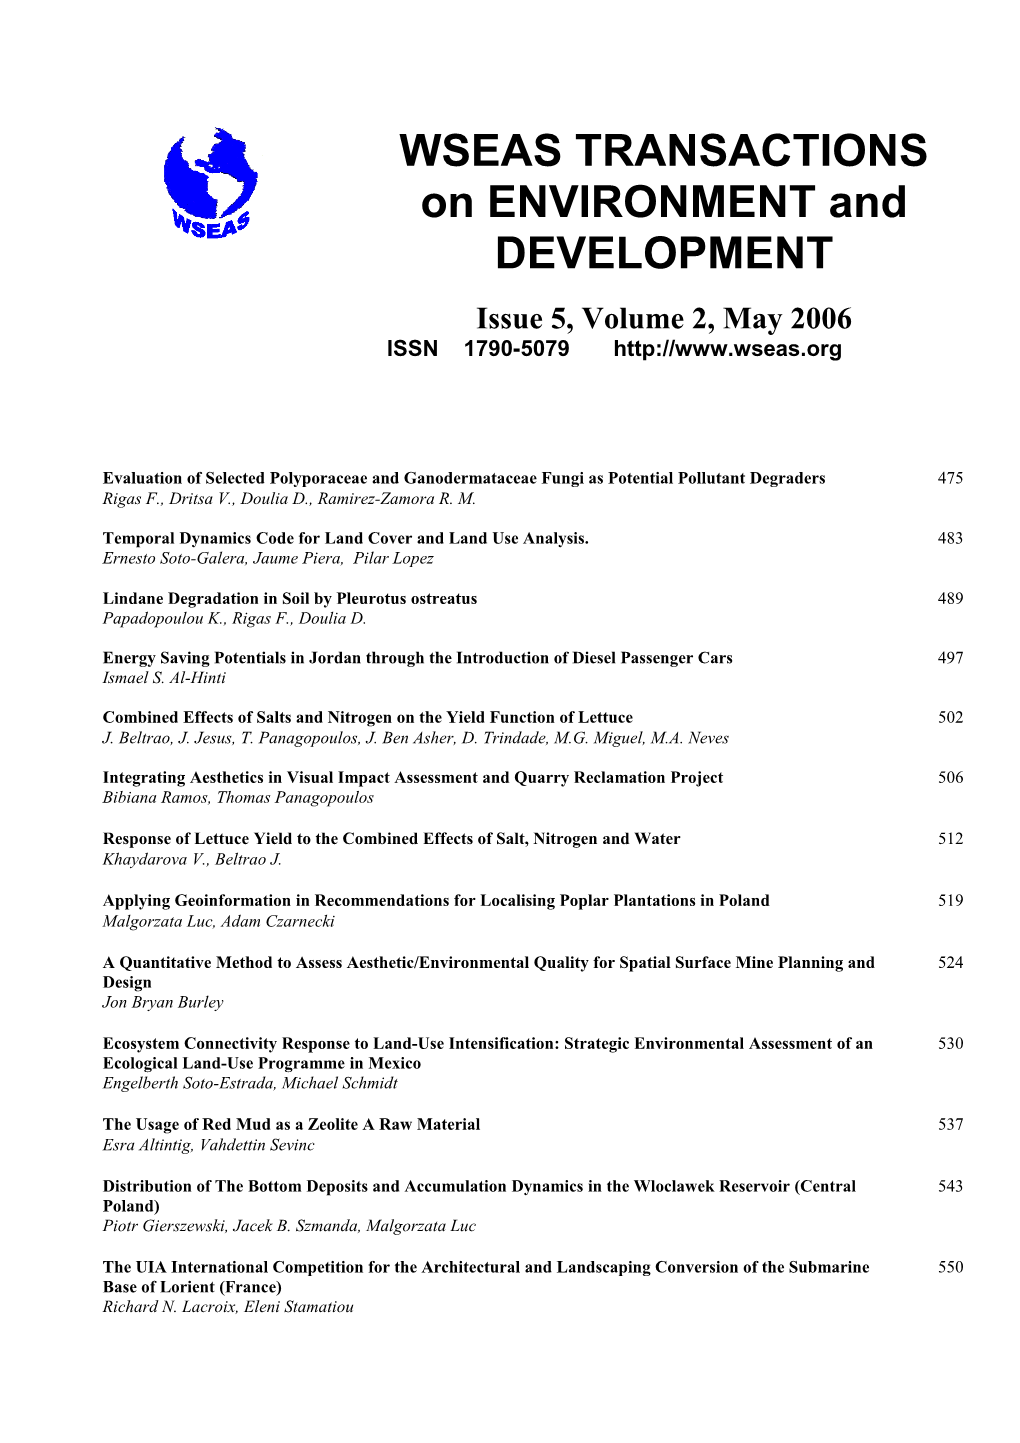 WSEAS TRANSACTIONS on ENVIRONMENT and DEVELOPMENT, May 2006